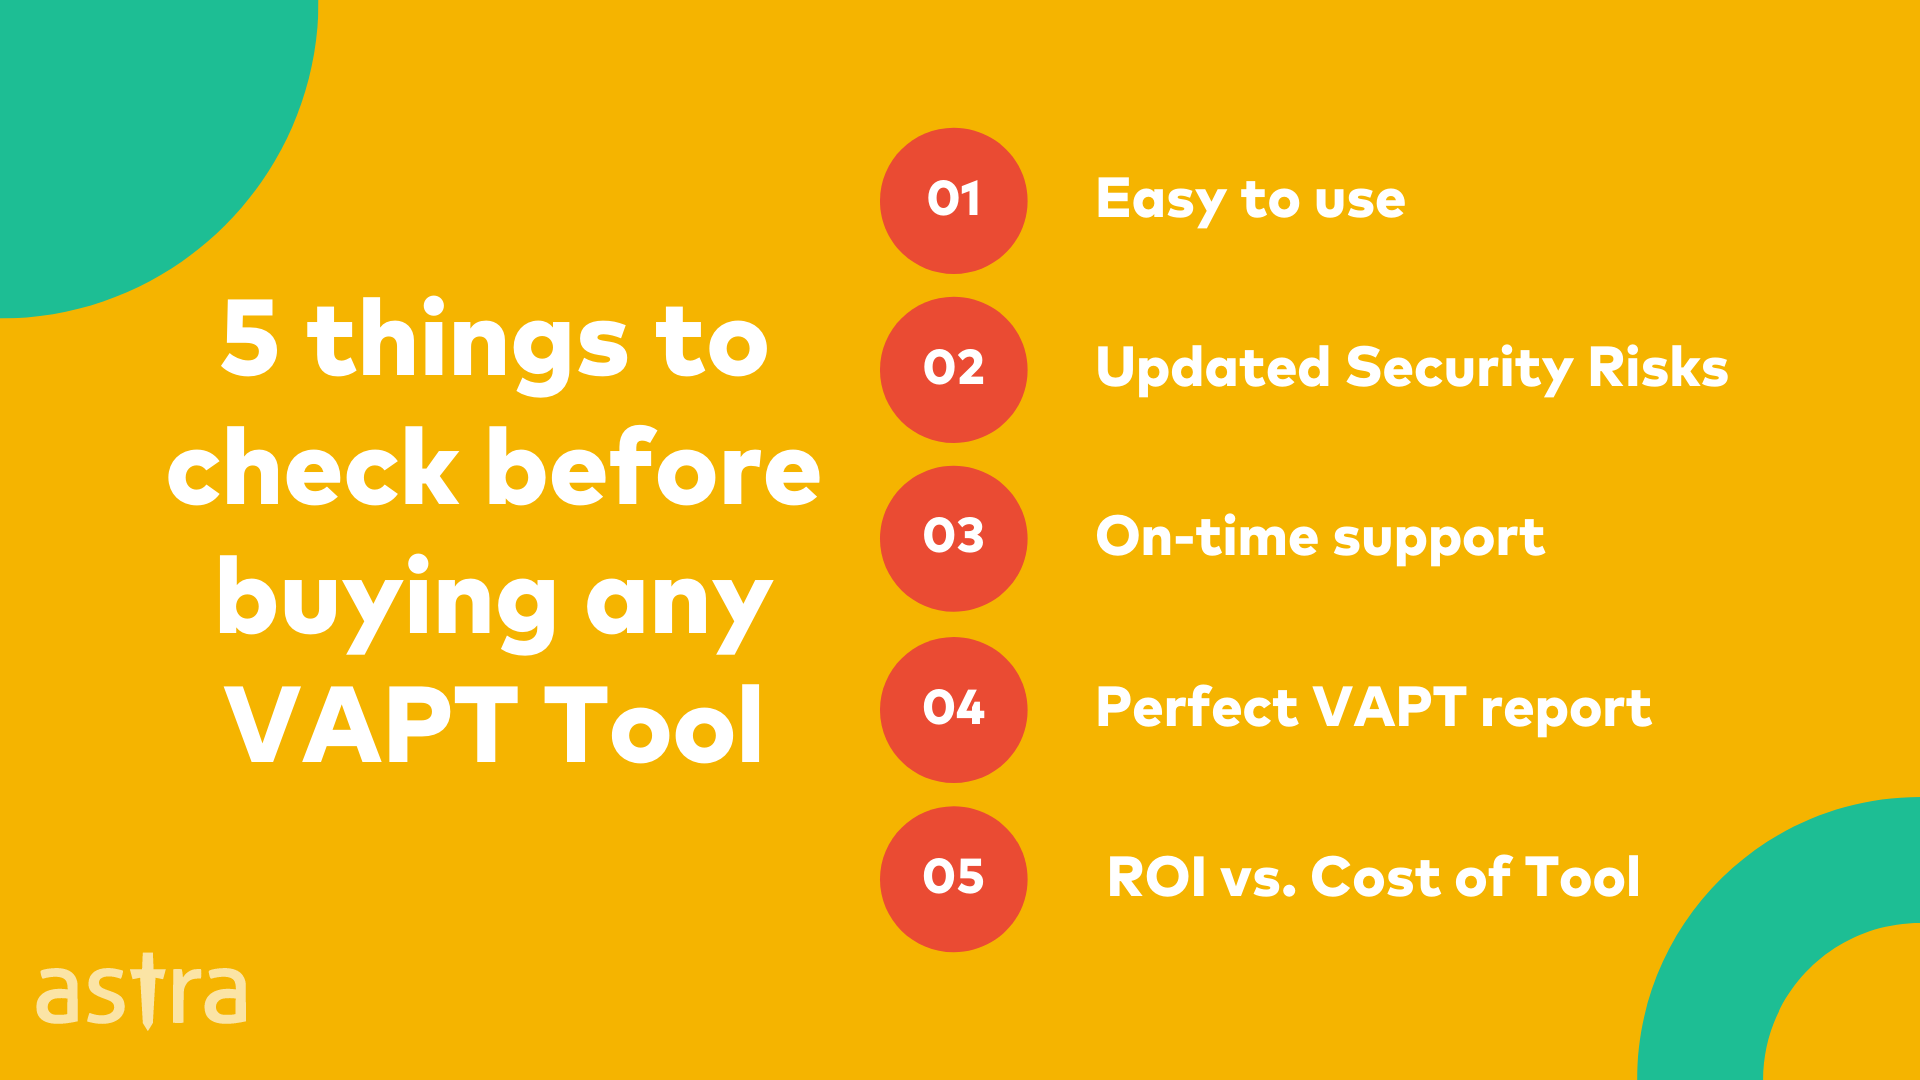 5 things to check before buying any VAPT Tool